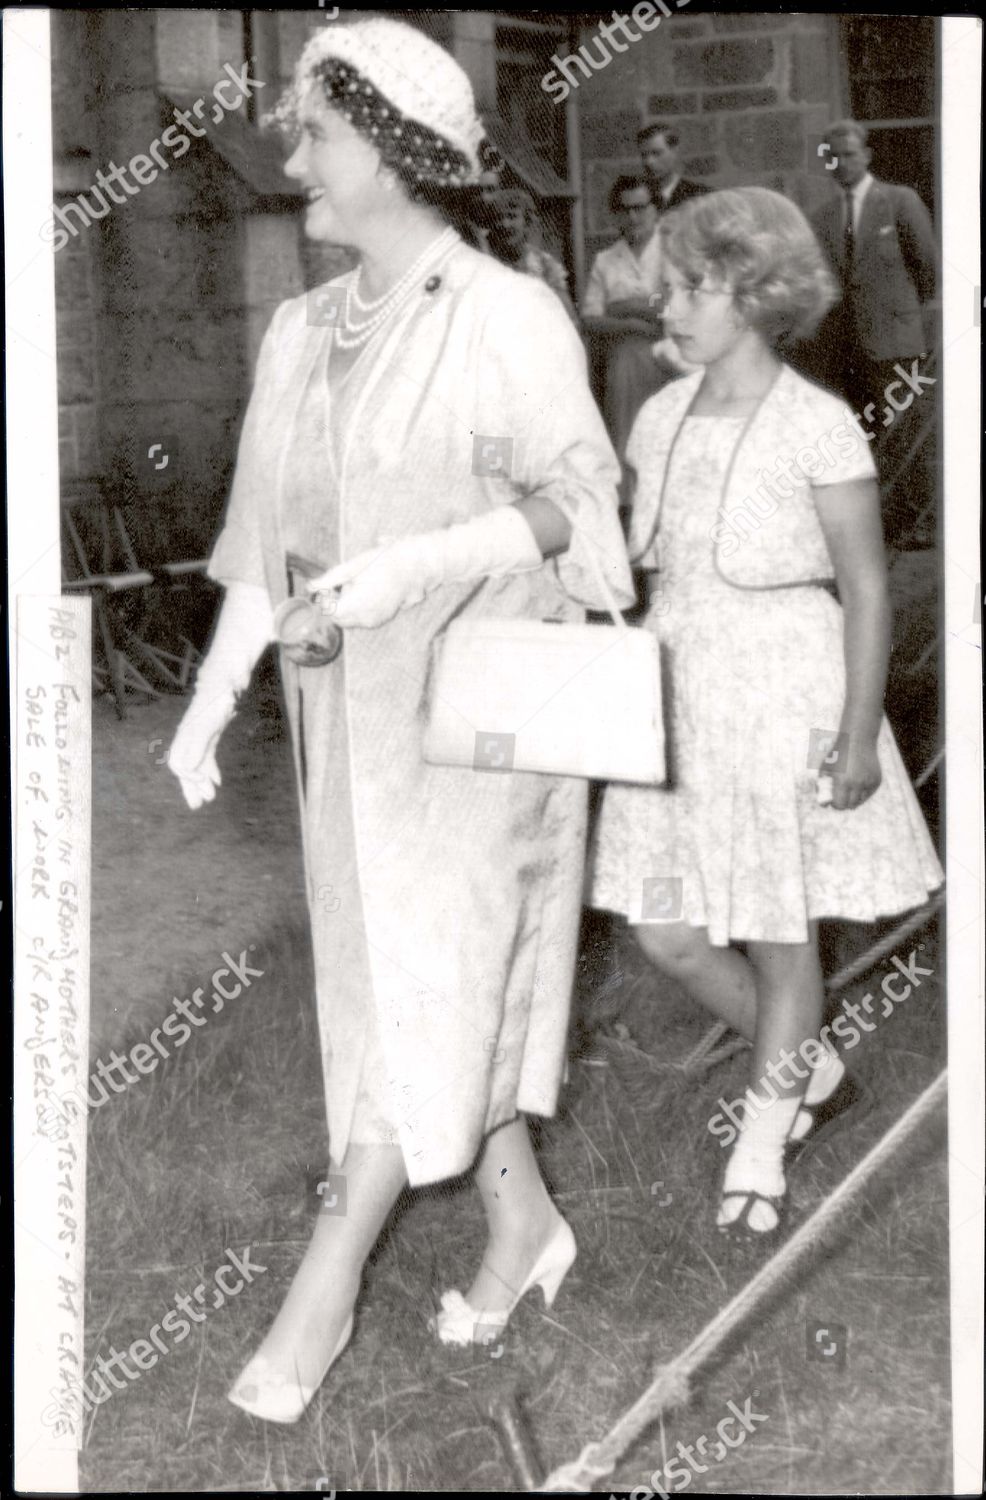 queen-elizabeth-queen-mother-died-30-3-02-1959-princess-anne-stands-among-the-sightseers-at-crathie-church-sale-of-work-yesterday-she-was-watching-the-queen-mother-who-had-brought-her-from-balmoral-for-a-lightning-20-minute-shopping-tour-buying-shutterstock-editorial-888256a.jpg